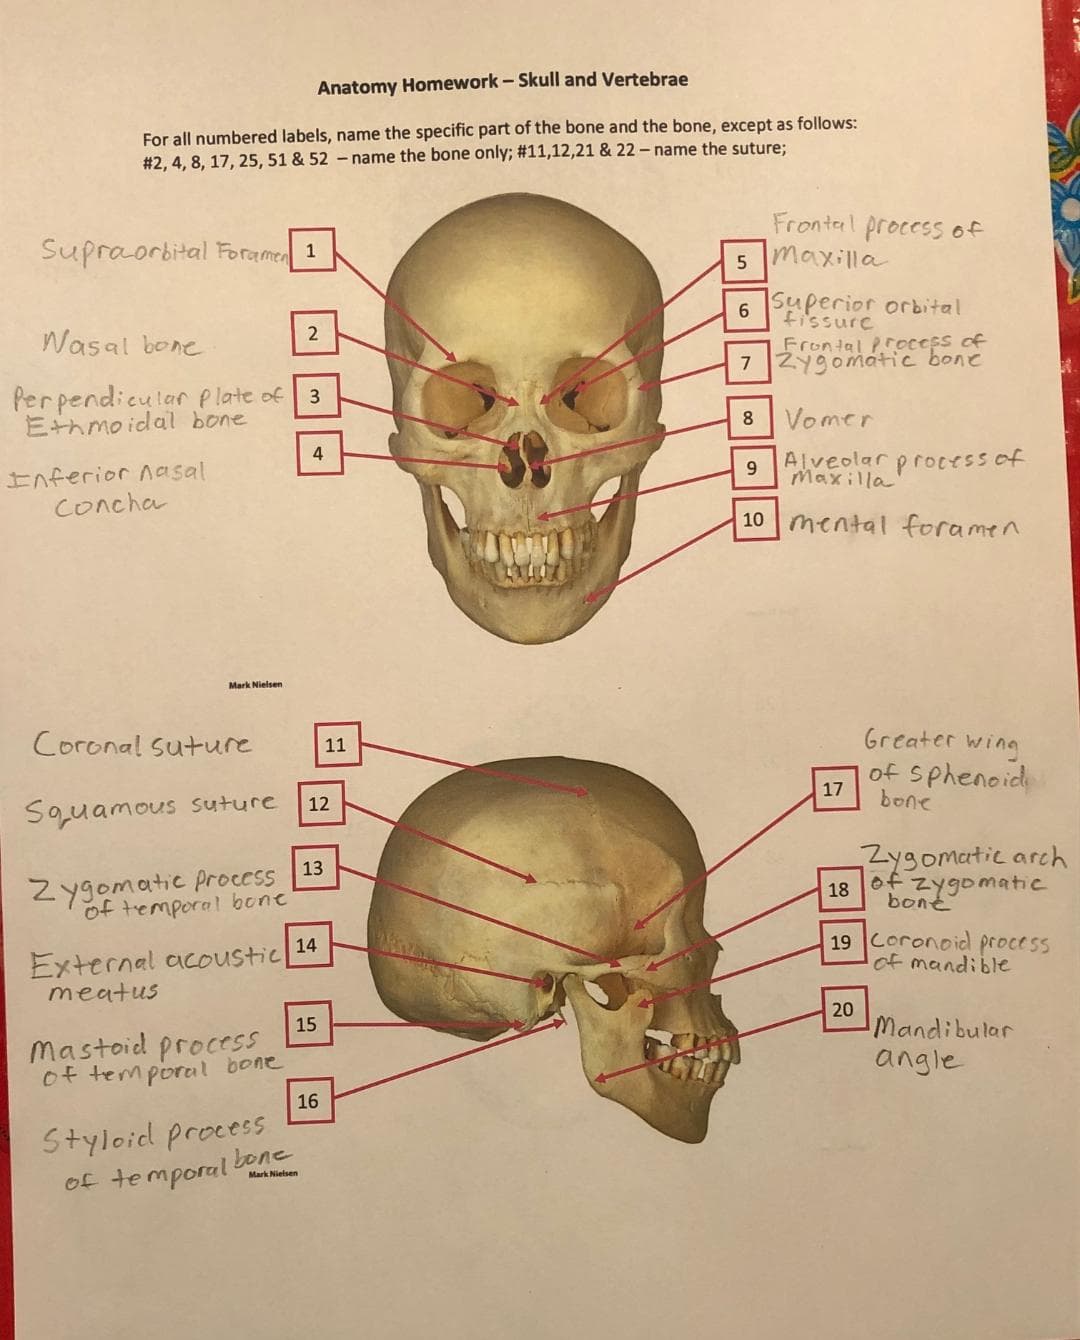 Anatomy Homework - Skull and Vertebrae
For all numbered labels, name the specific part of the bone and the bone, except as follows:
# 2, 4, 8, 17, 25, 51 & 52 -name the bone only; #11,12,21 & 22 - name the suture;
Supraorbital Foramen 1
Fronteal process of
maxilla
Superior orbital
fissurc
6.
Wasal bone
Frontal Process of
7 Zygomaátic bone
Perpendicularplate of
Ethmo idal bone
8 Vomer
Alveolar process of
4
Inferior nasal
Concha
9
Maxilla
10 mental foramen
Mark Nielsen
Greater wing
of sphenoid
bone
Coronal suture
11
17
12
Squamous suture
Zygomatic arch
Zygomatic process
temporal bone
13
18 of zygomatic
bont
External acoustic 14
meatus
19 Coronoid process
of mandible
20
Mandibular
15
Mastoid process
angle
of temporal bone
16
Styloid procesS
of temporal bone
Mark Nielsen
